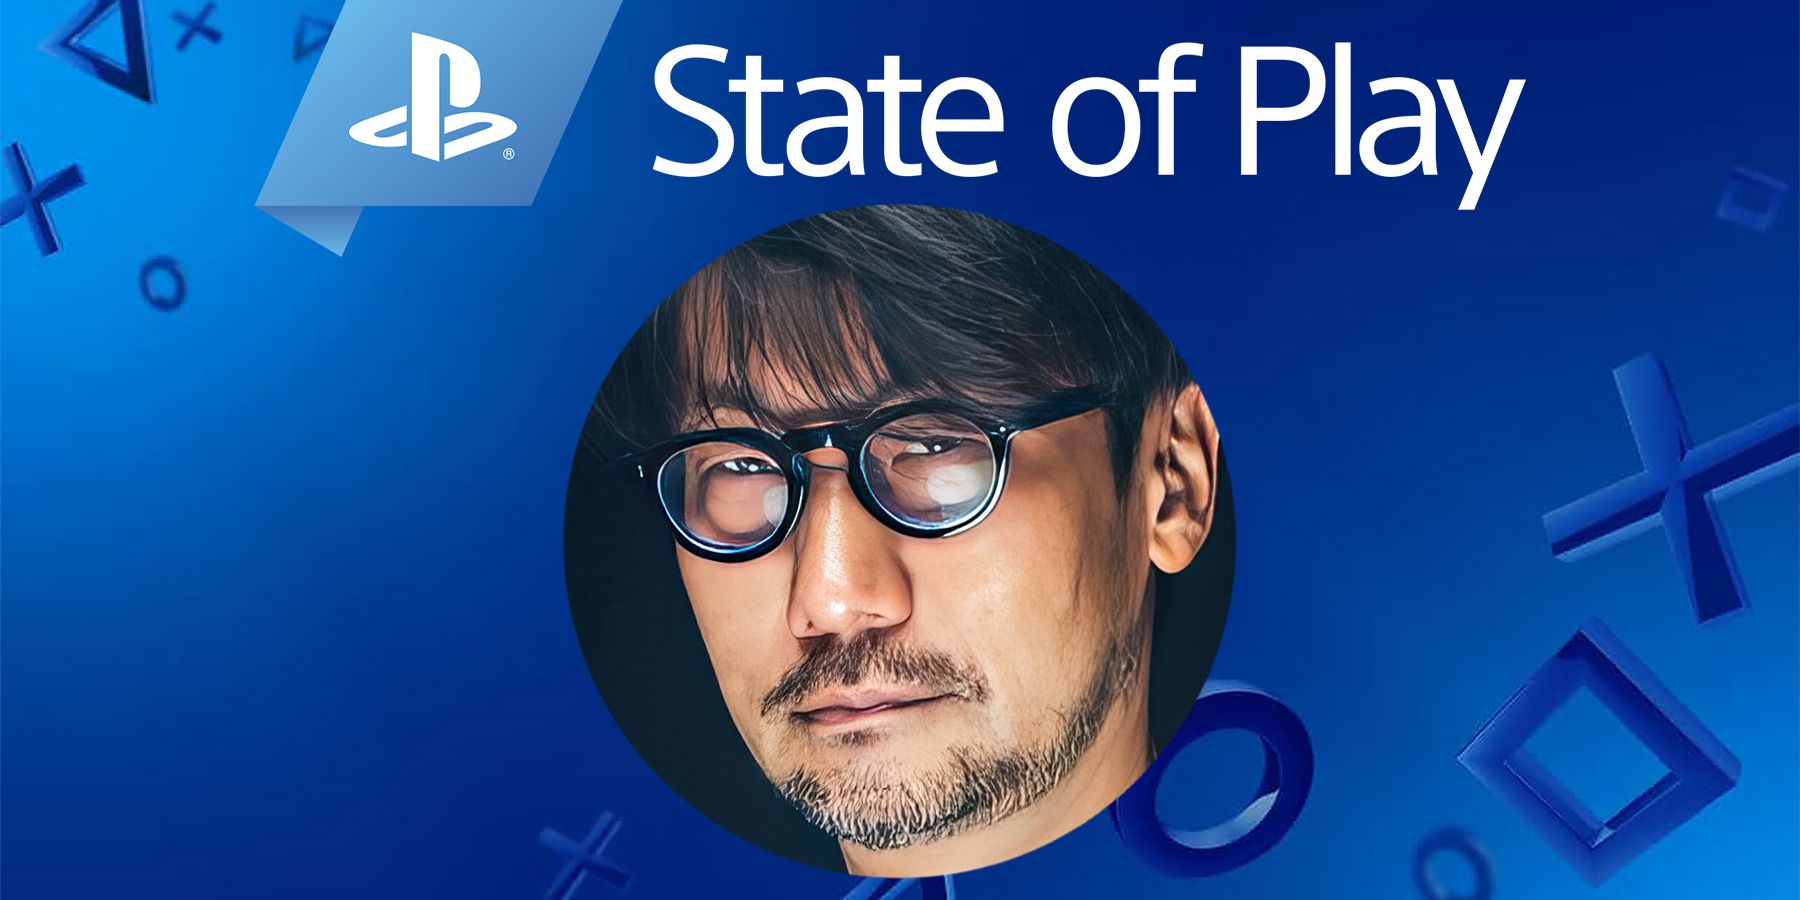 New Hideo Kojima Picture Sparks PlayStation State of Play Rumors